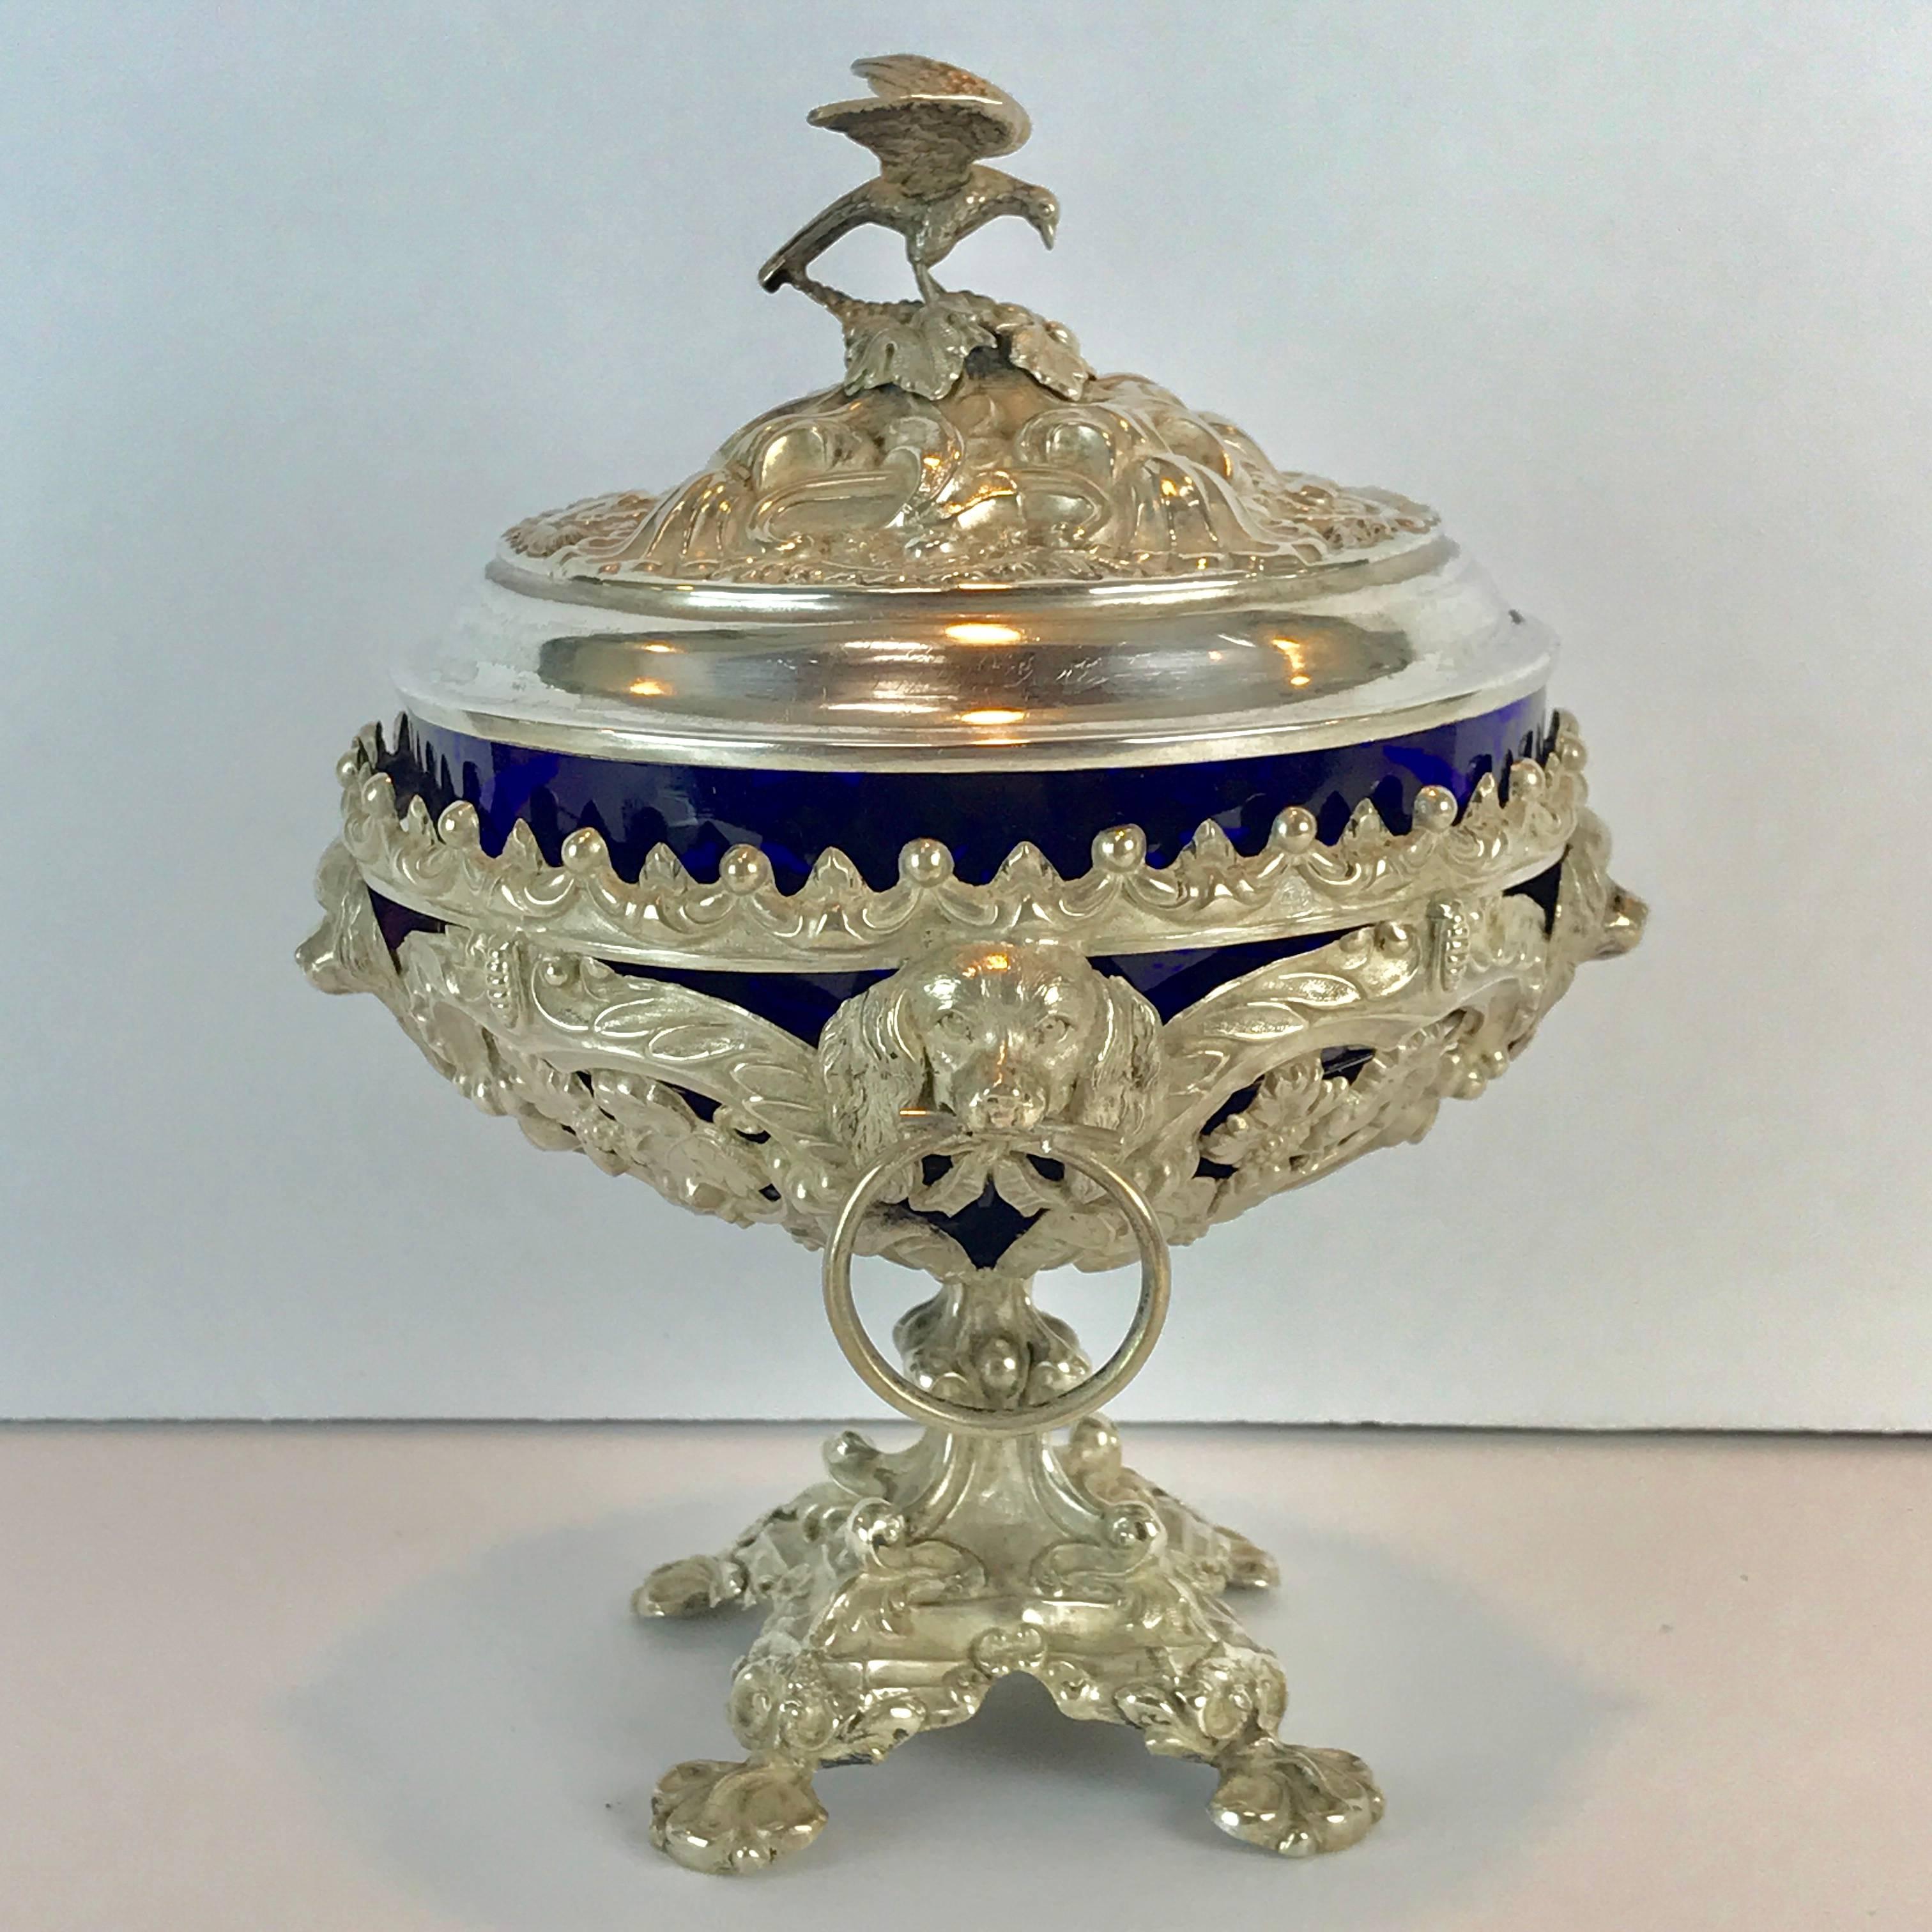 Antique silver dog motif covered cobalt urn, the reposed lid with eagle finial, the body with cobalt blue glass liner in a pierced body with four dog motif medallions, raised on a paw footed pedestal base. Both the lid and base are marked with